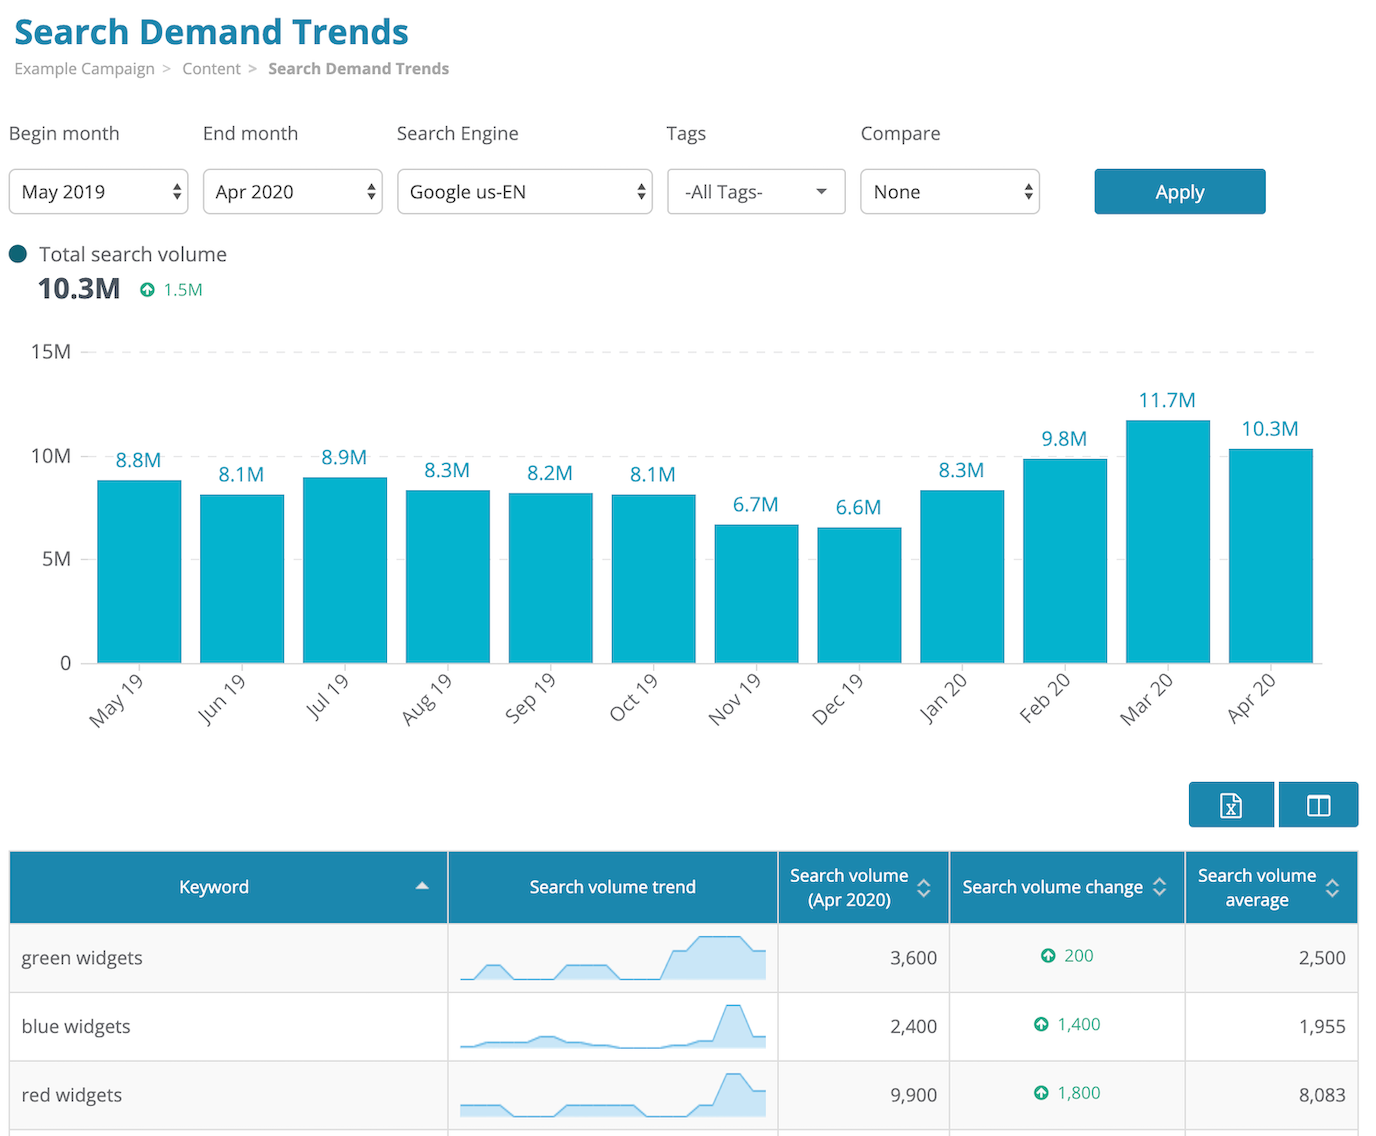 Search demand trends